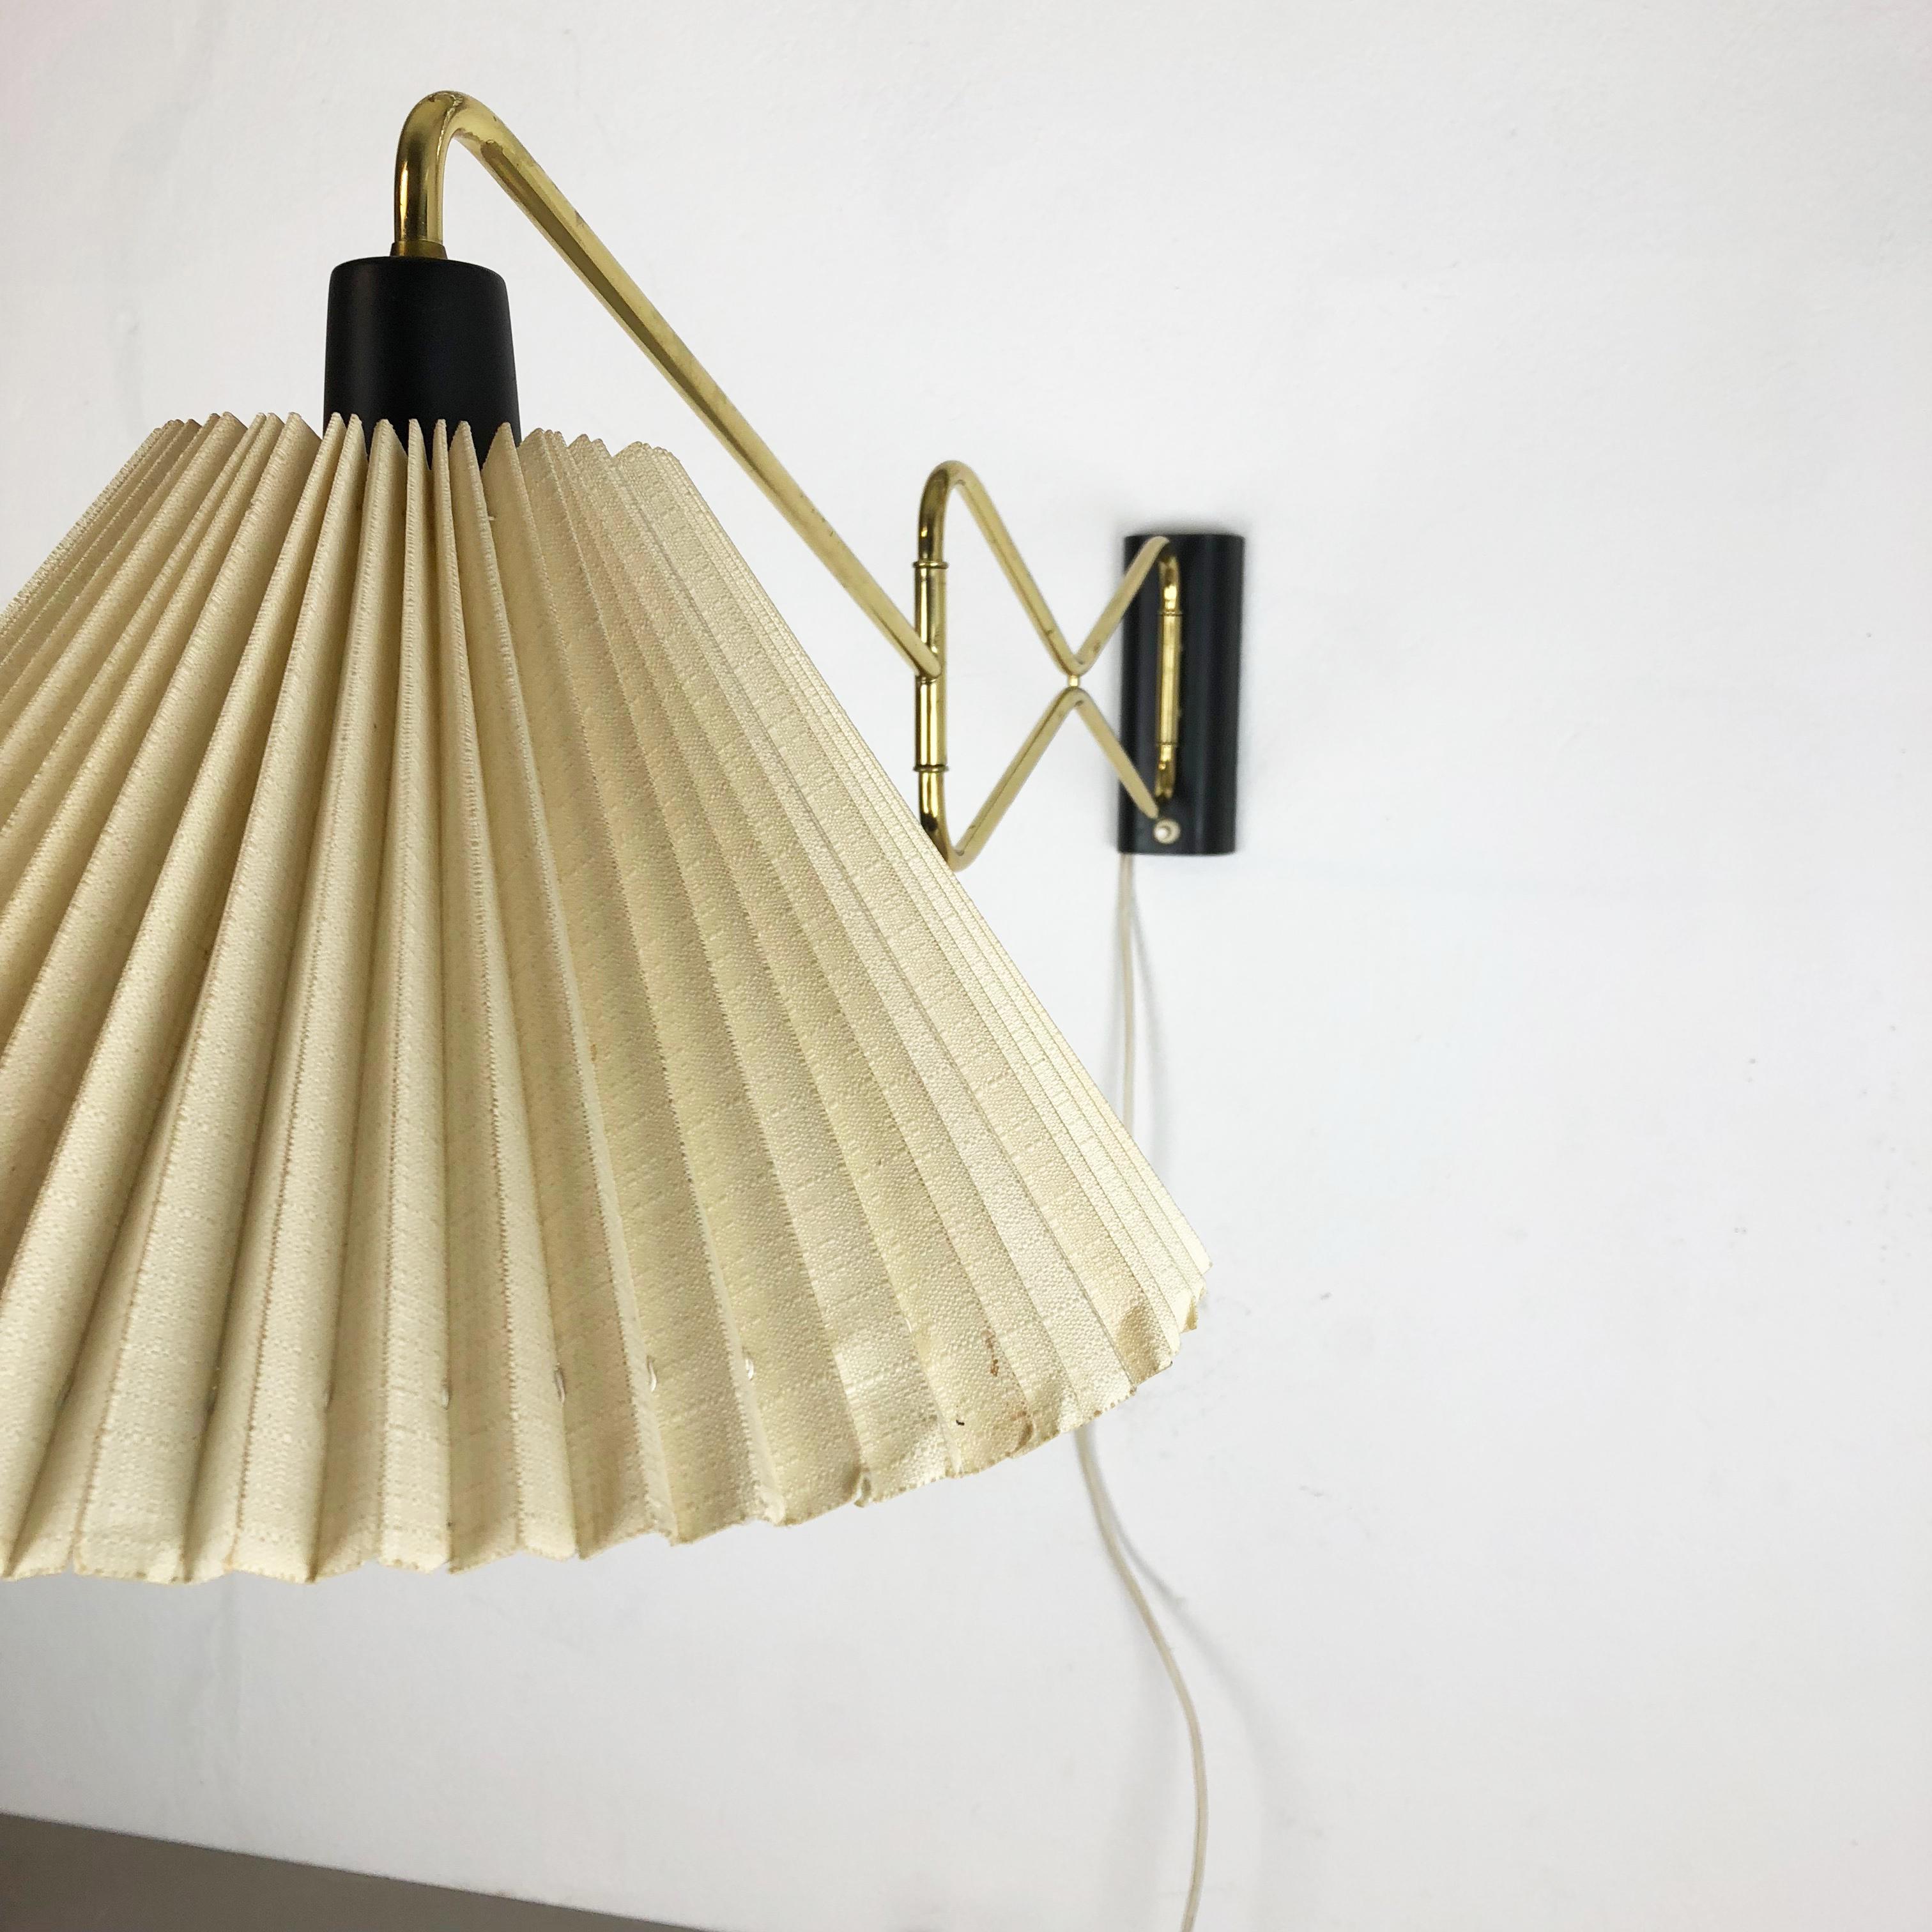 Original Modernist 1950s Brass Metal Swing Wall Light Made by Cosack, Germany 11